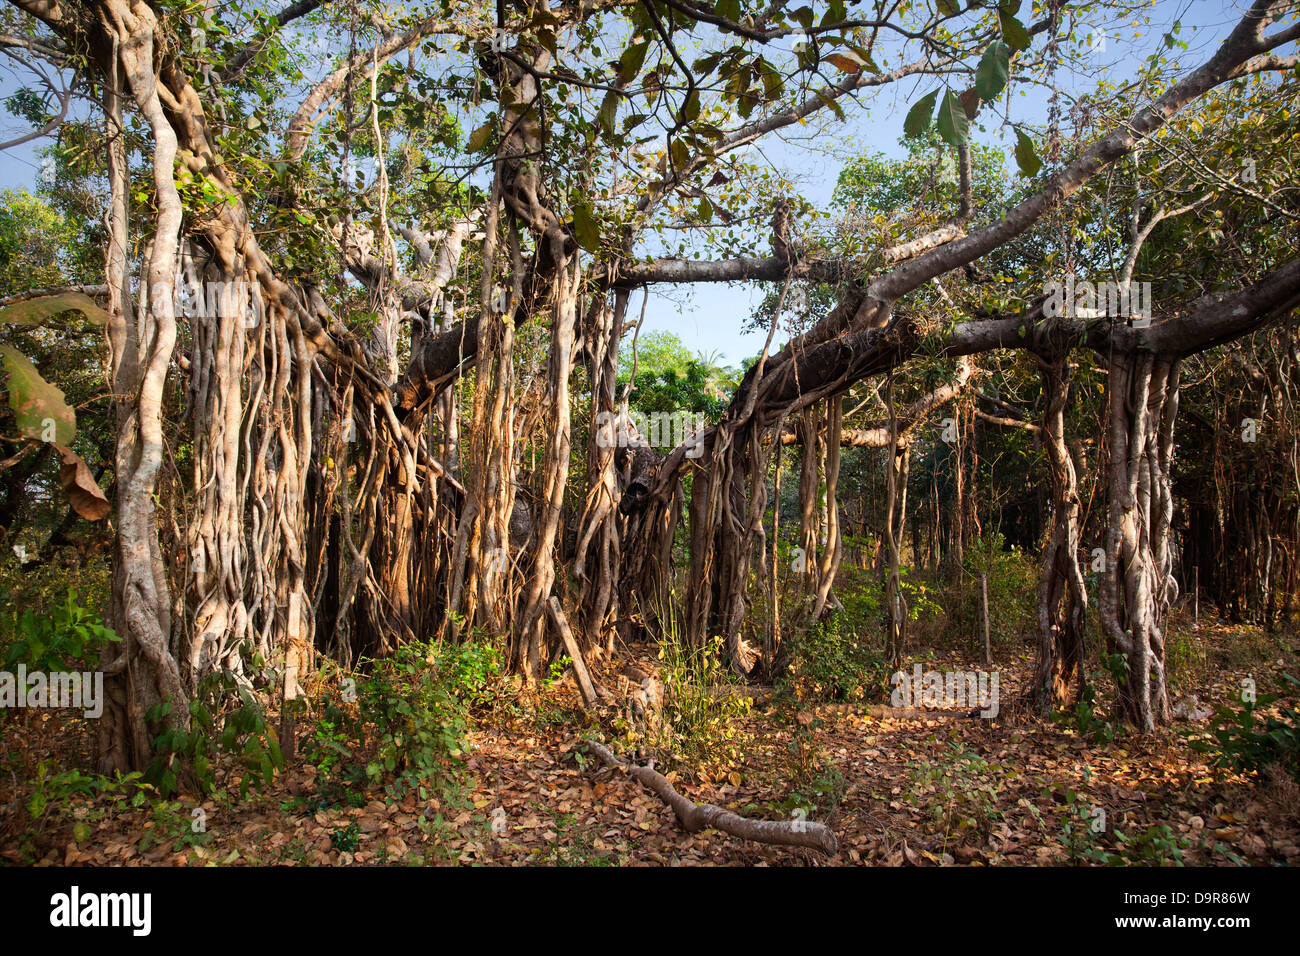 Aerial roots of trees, Goa, India Stock Photo